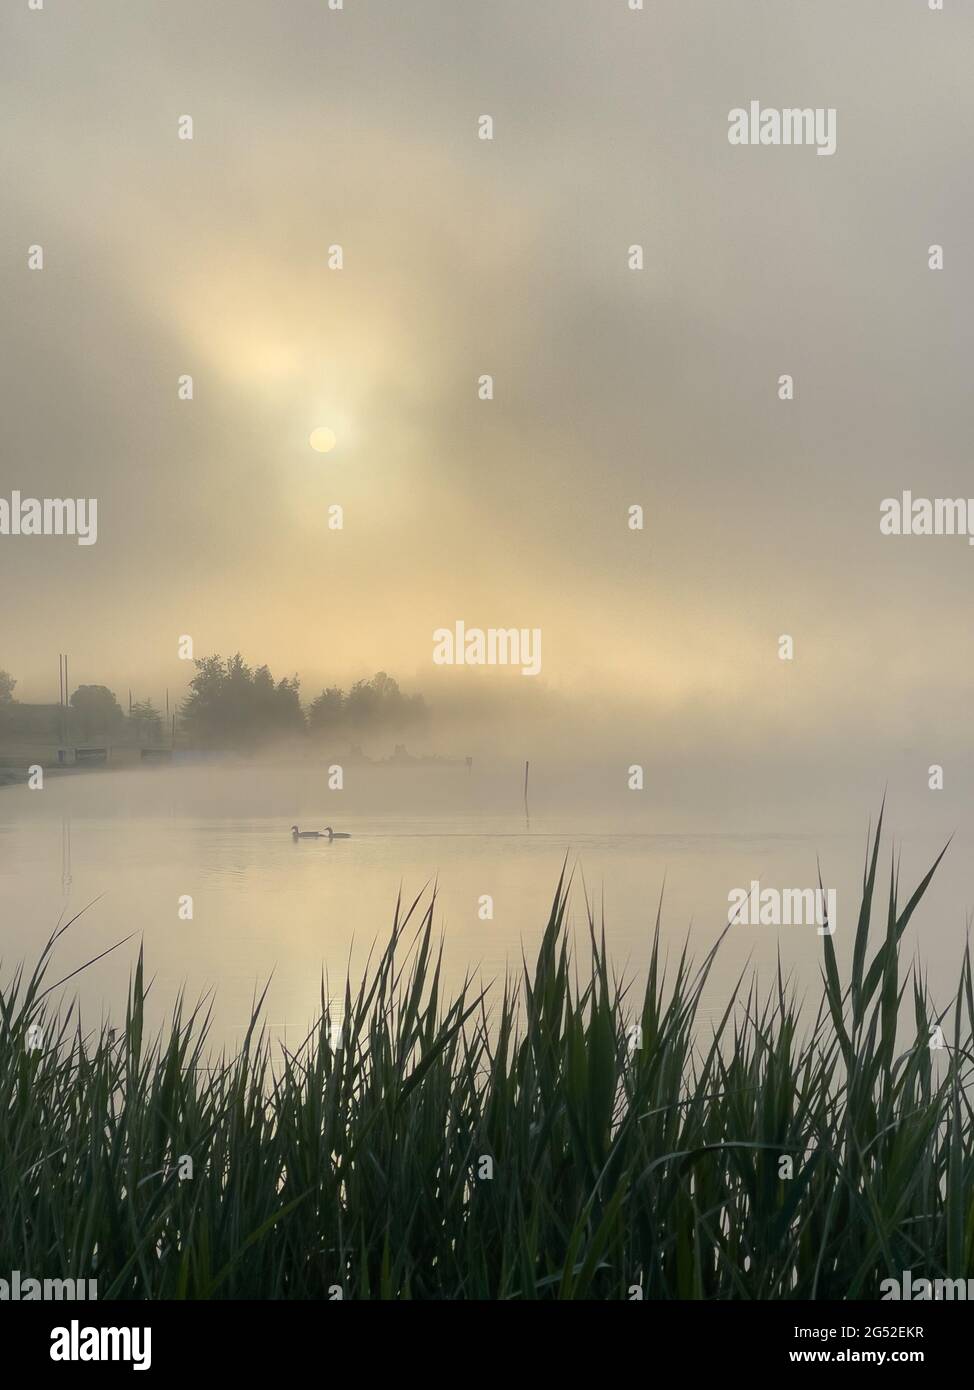 scenic view of sunrise over lake Olbersdorf. Misty atmosphere with ducks swimming in the lake and grass in the foreground Stock Photo